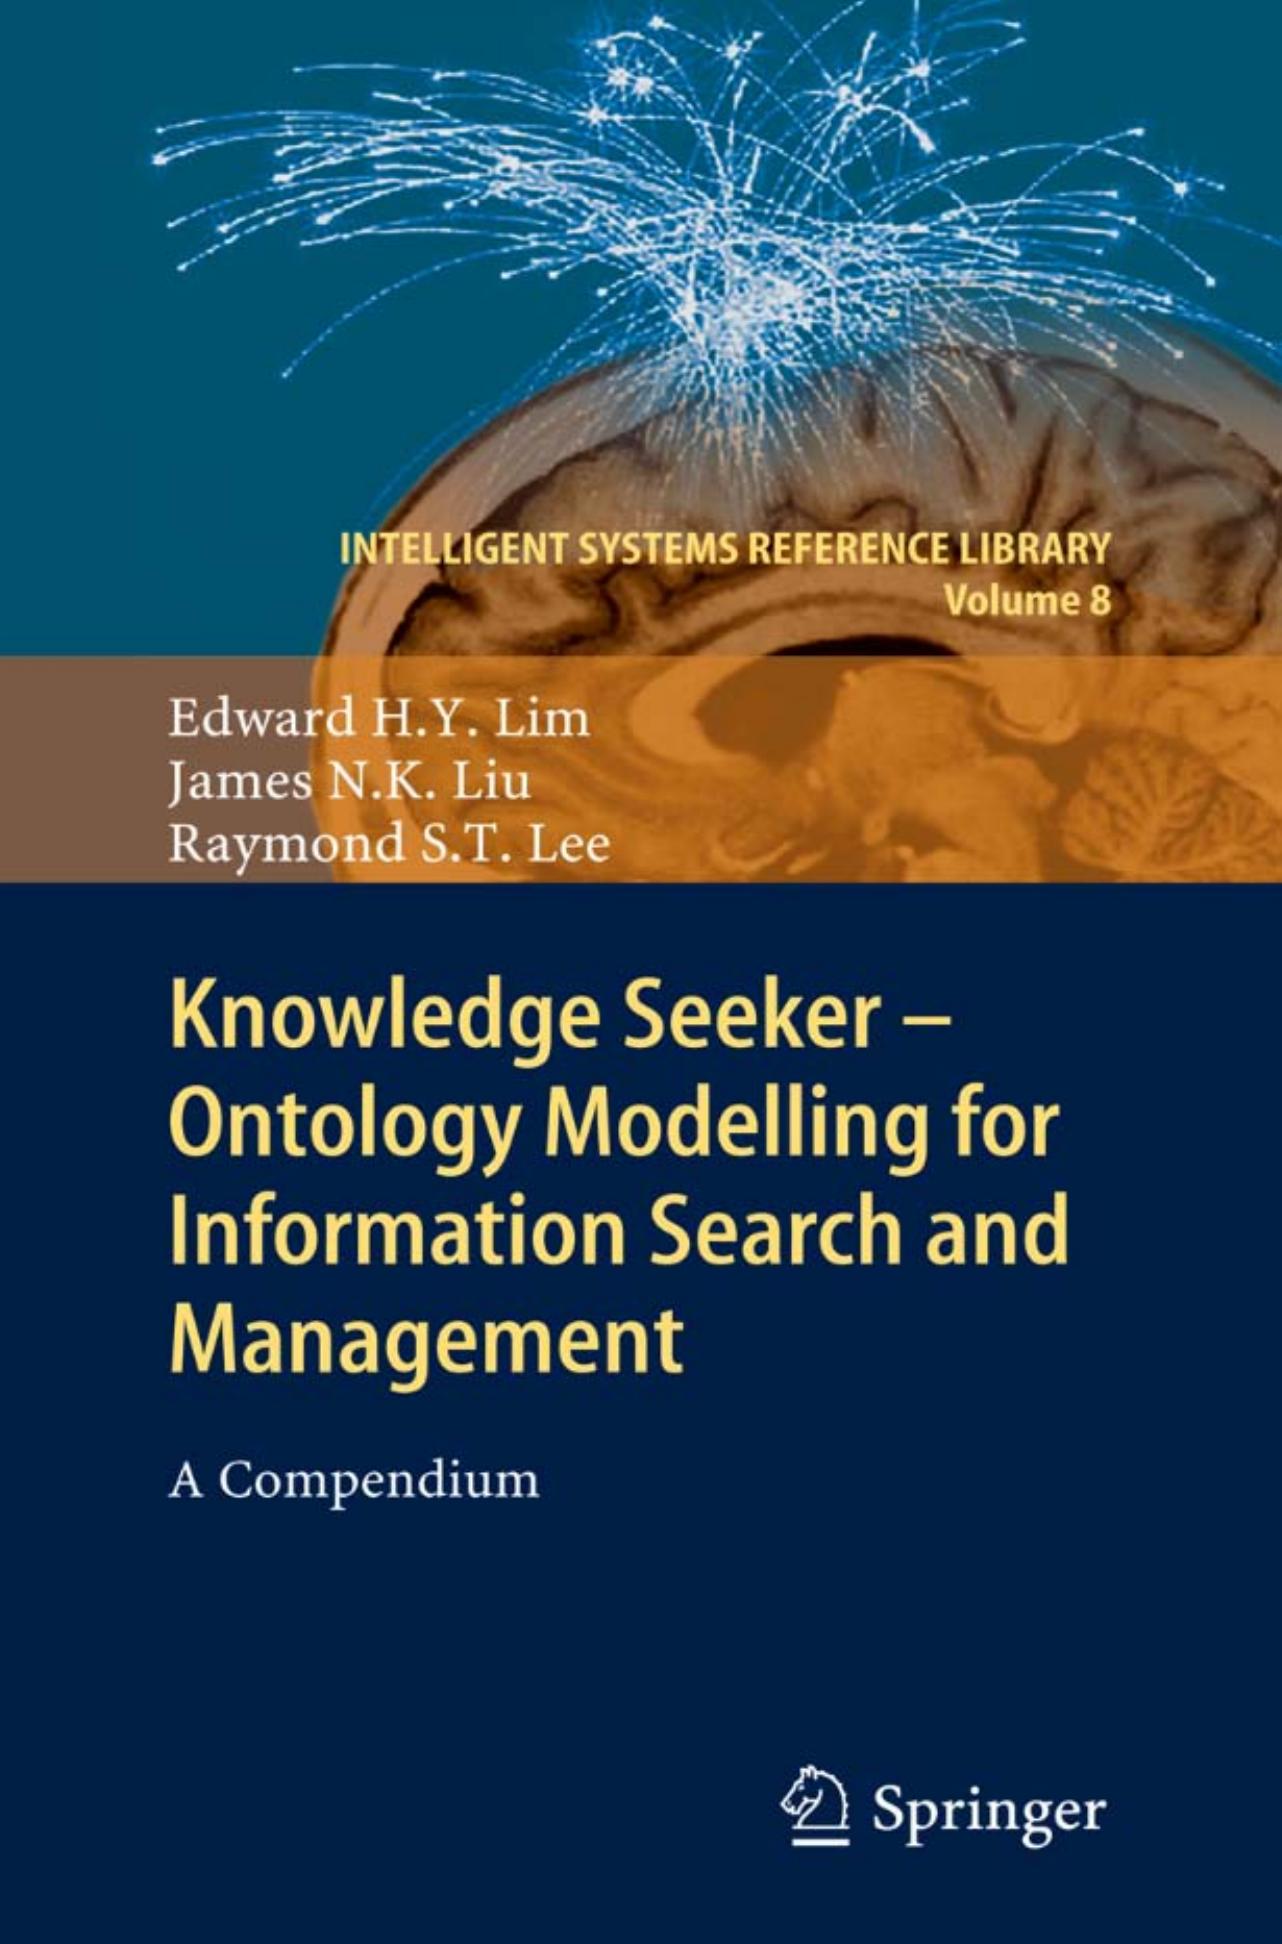 Knowledge Seeker - Ontology Modelling for Information Search and Management: A Compendium